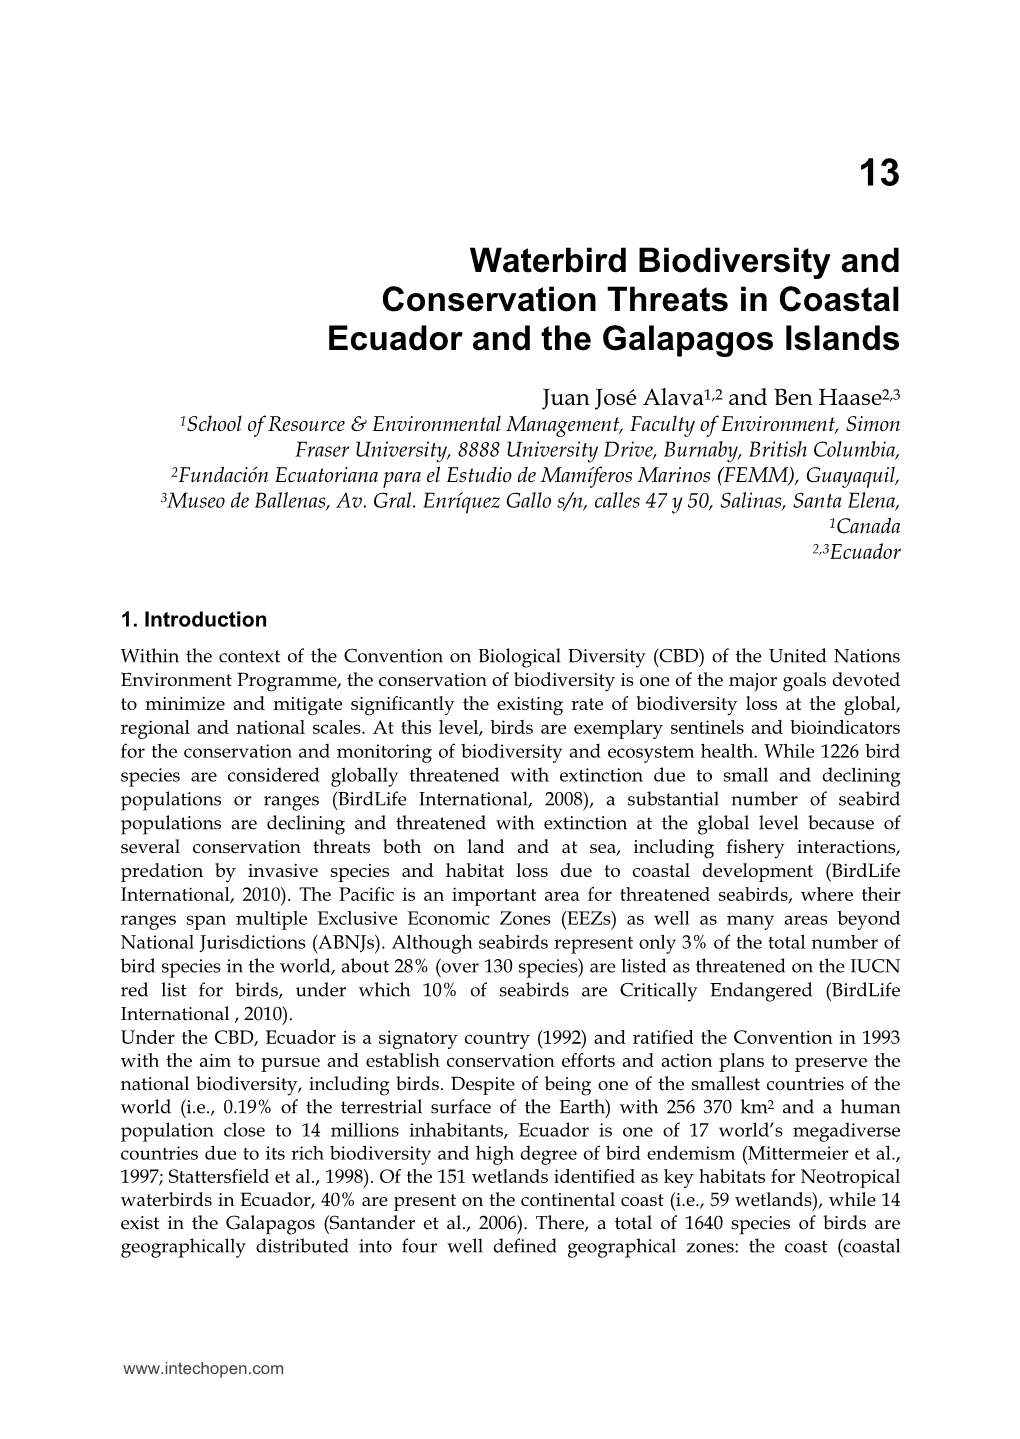 Waterbird Biodiversity and Conservation Threats in Coastal Ecuador and the Galapagos Islands